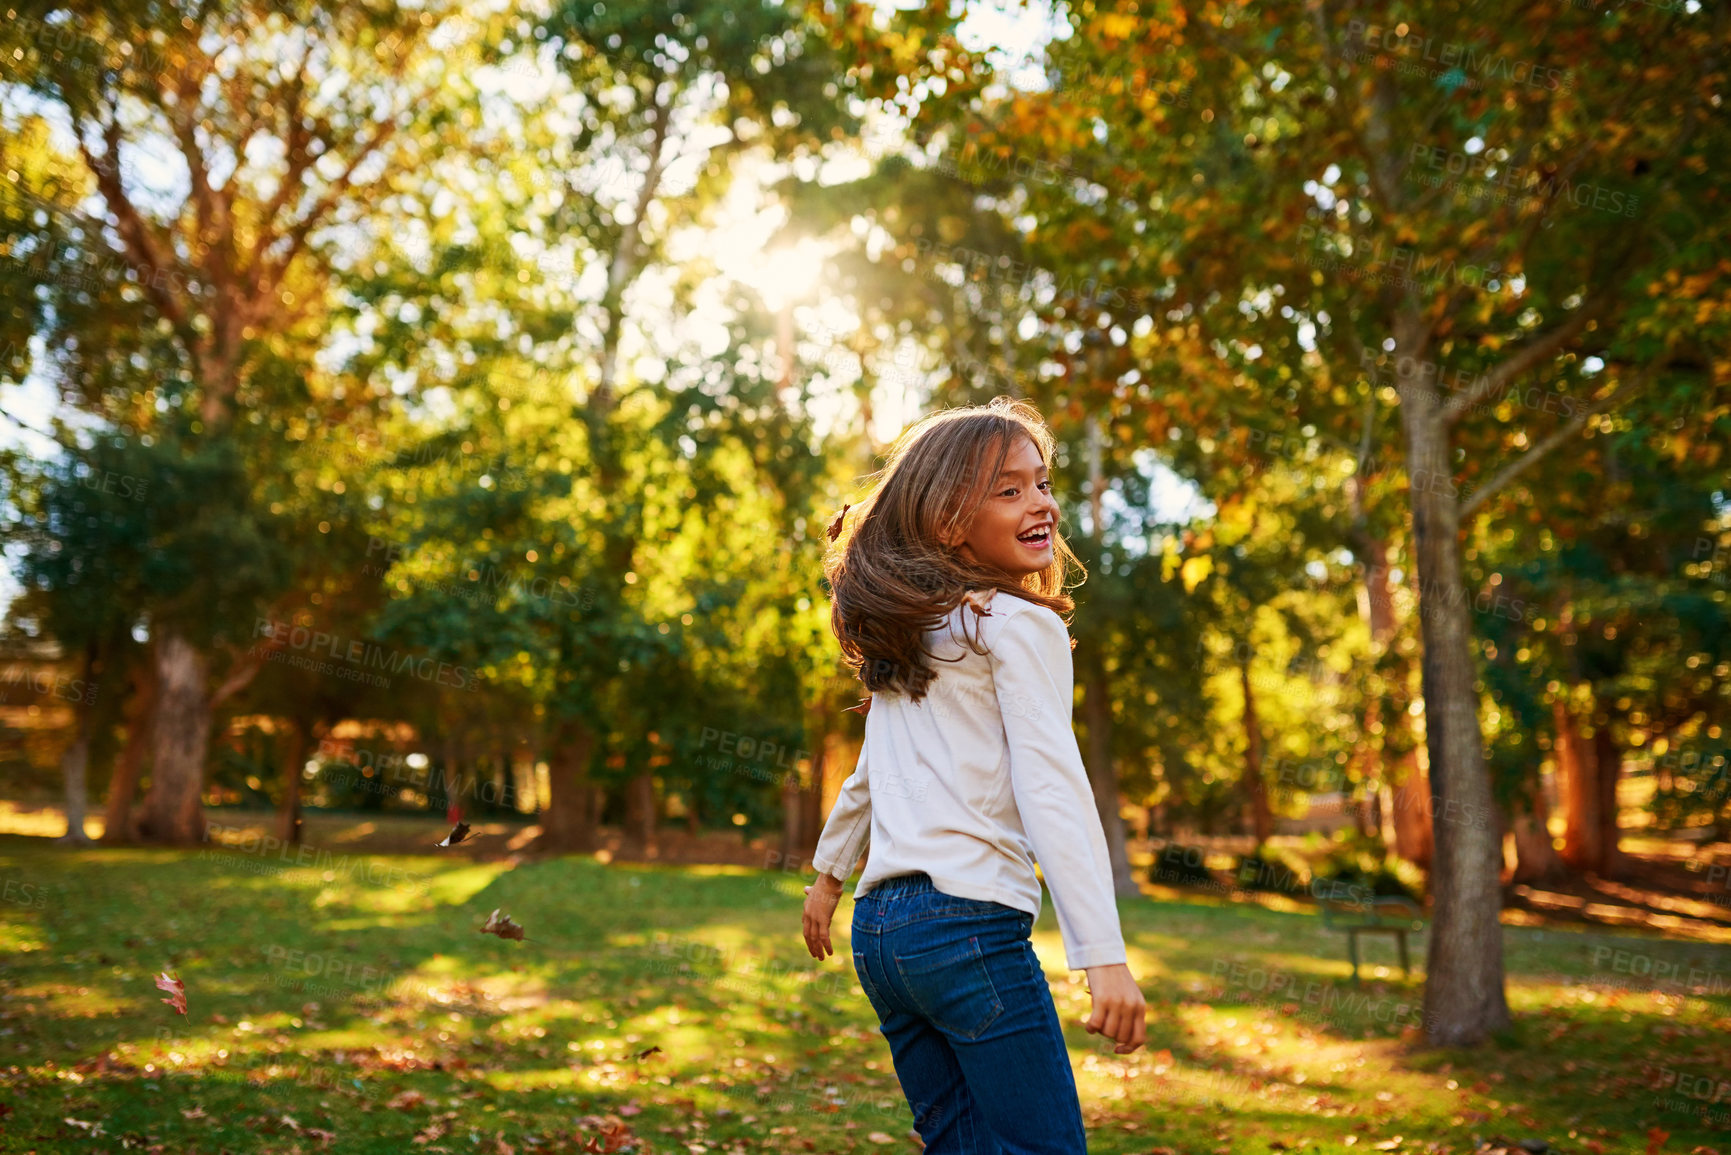 Buy stock photo Shot of a happy little girl playing in the autumn leaves outdoors